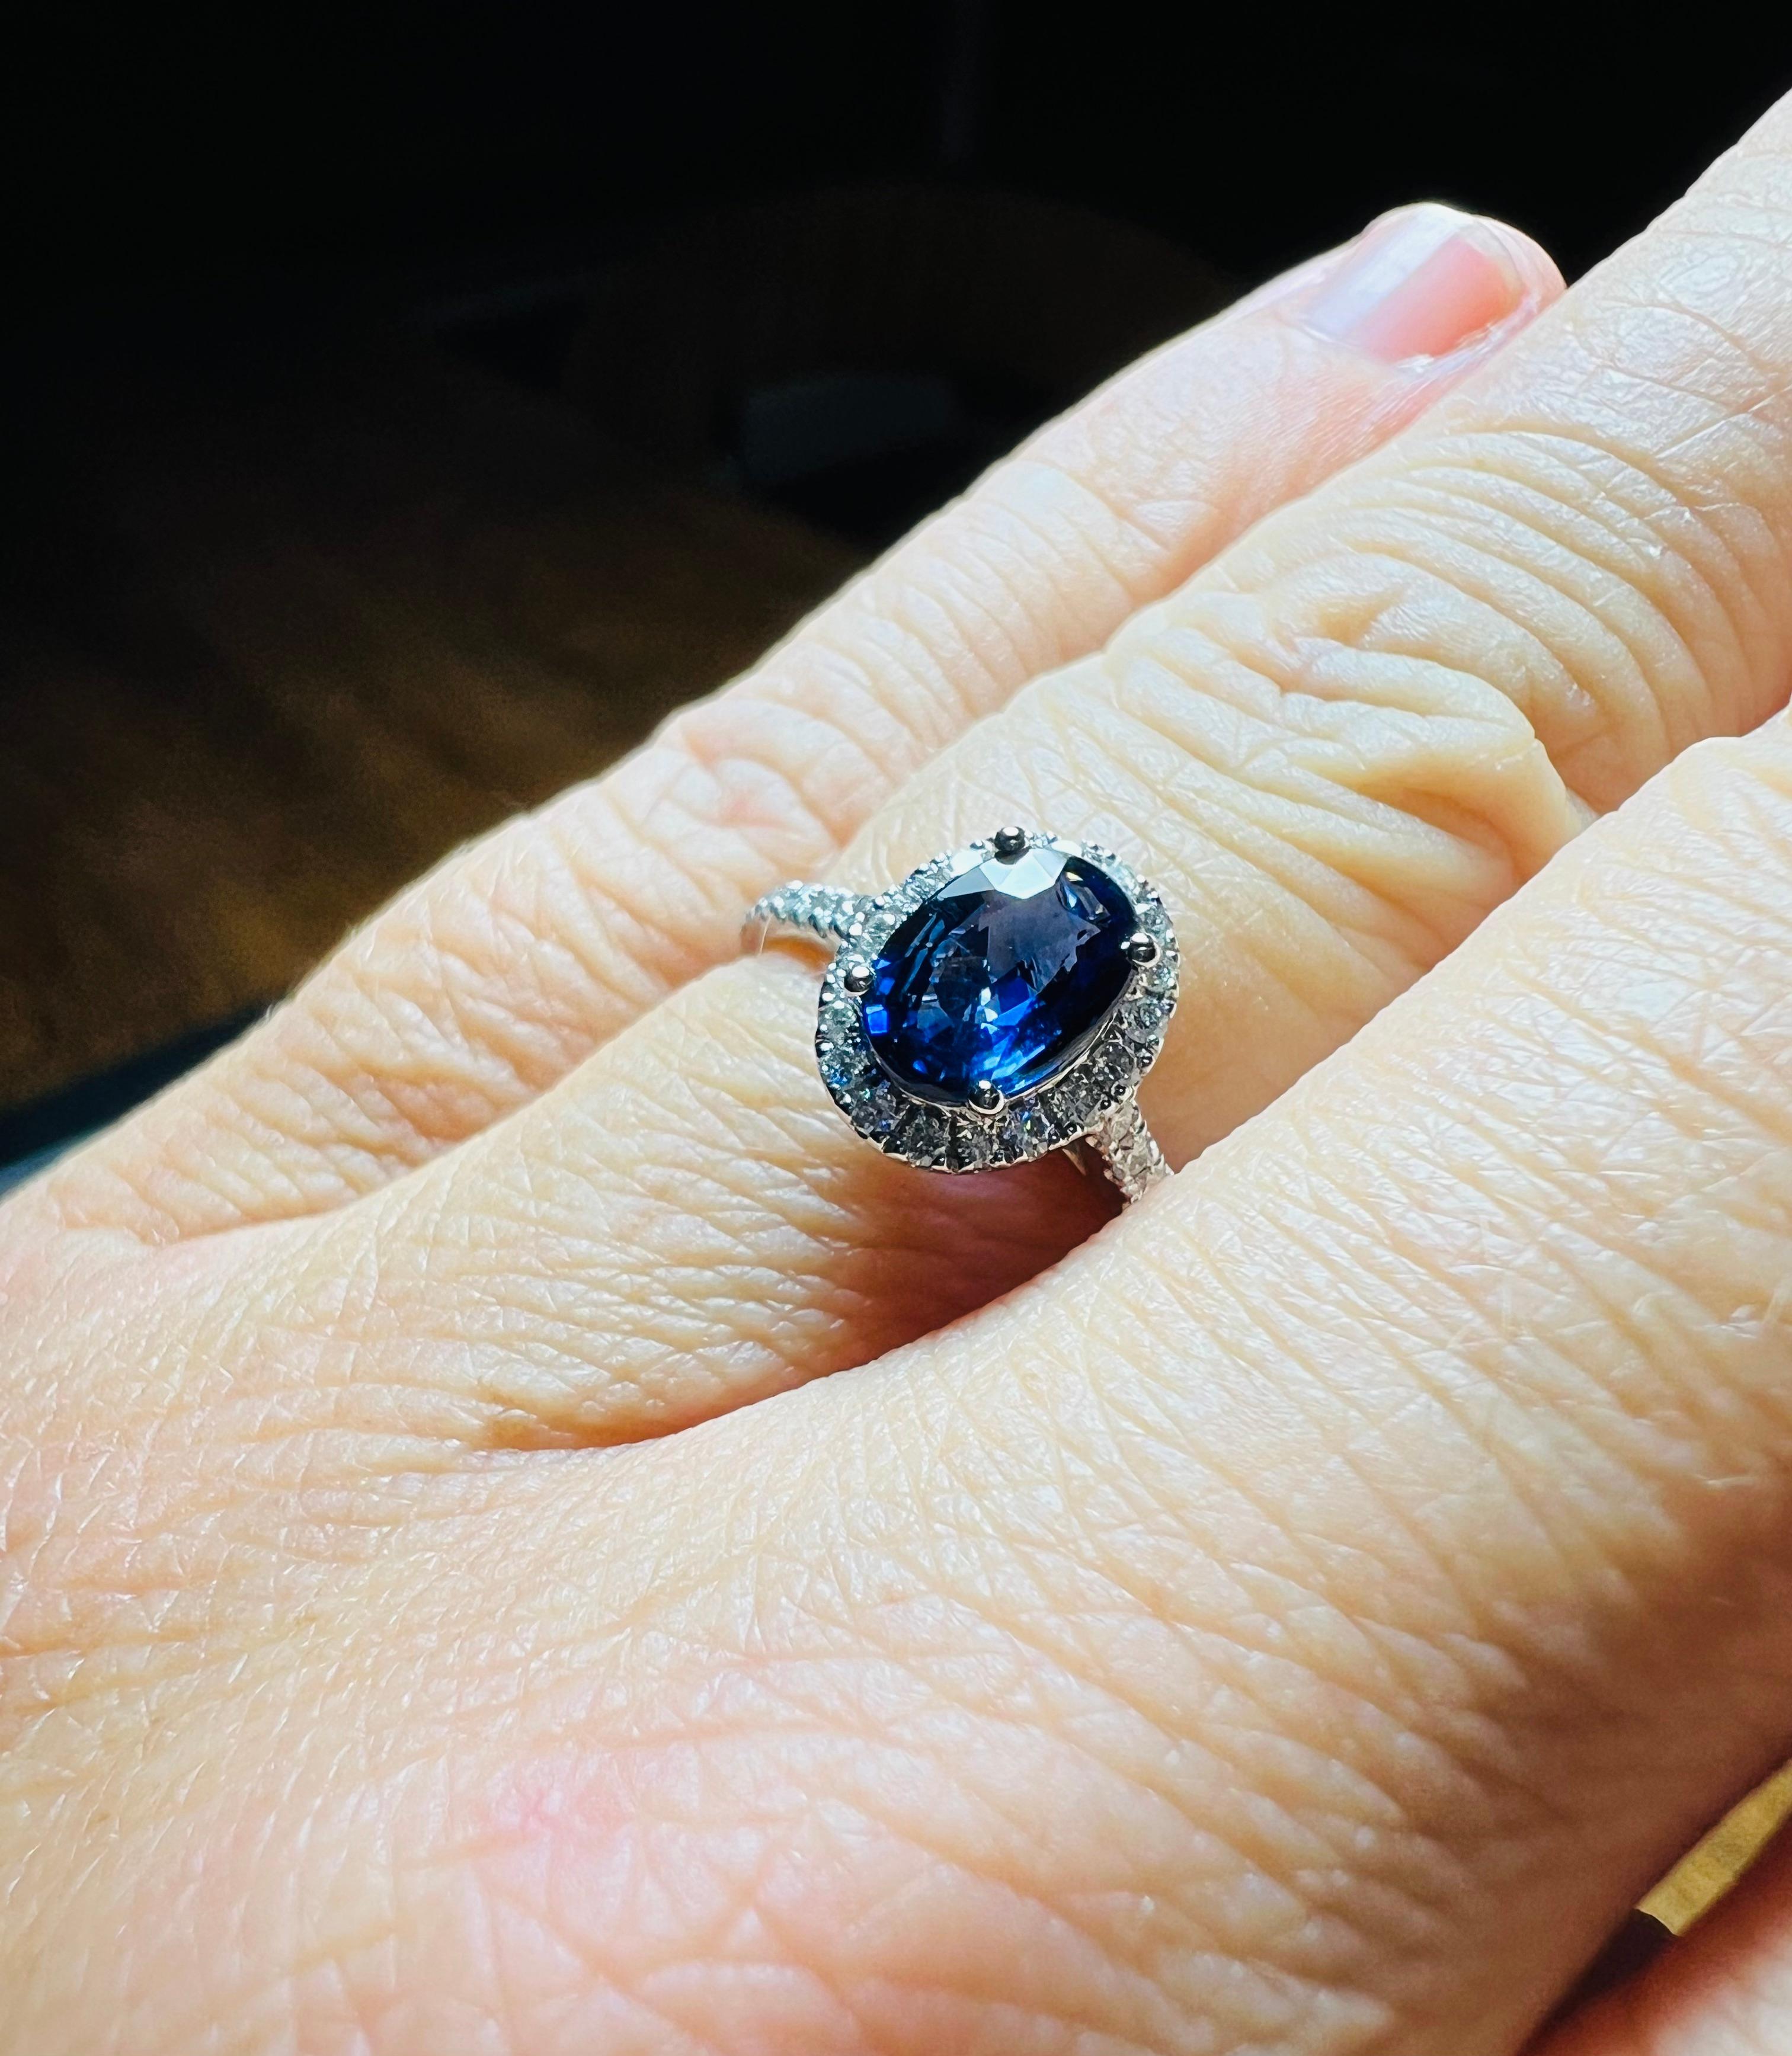 Ring Set With A Sapphire Surrounded By Diamonds, 18 Carat Gold 6